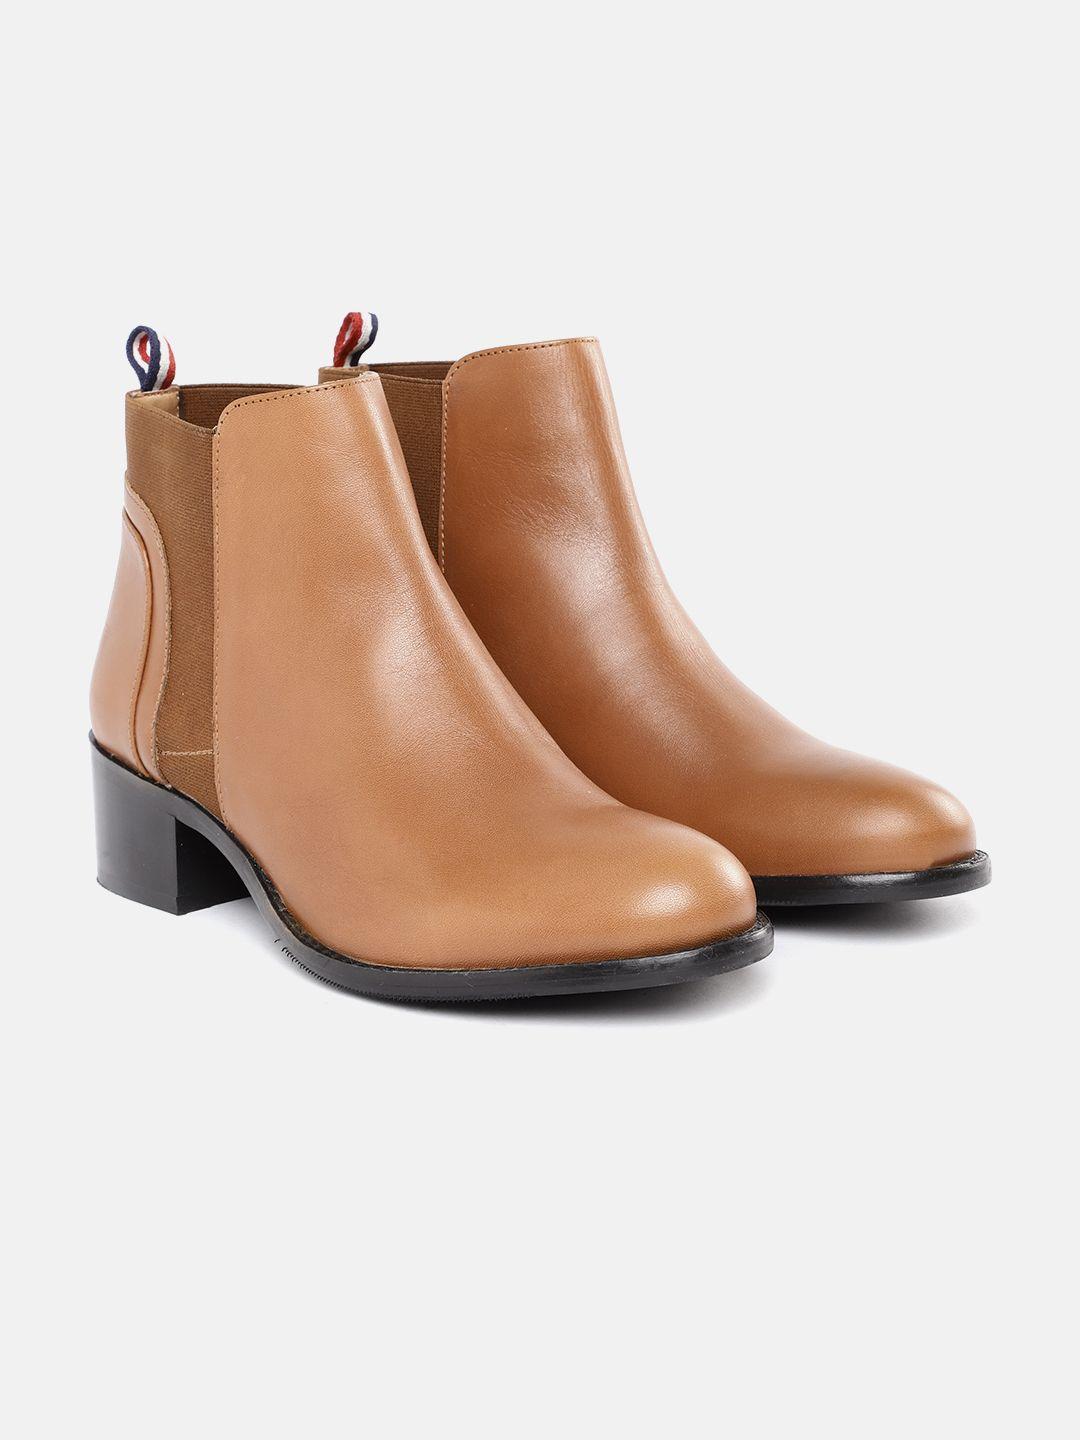 nautica women tan brown solid mid-top leather chelsea boots